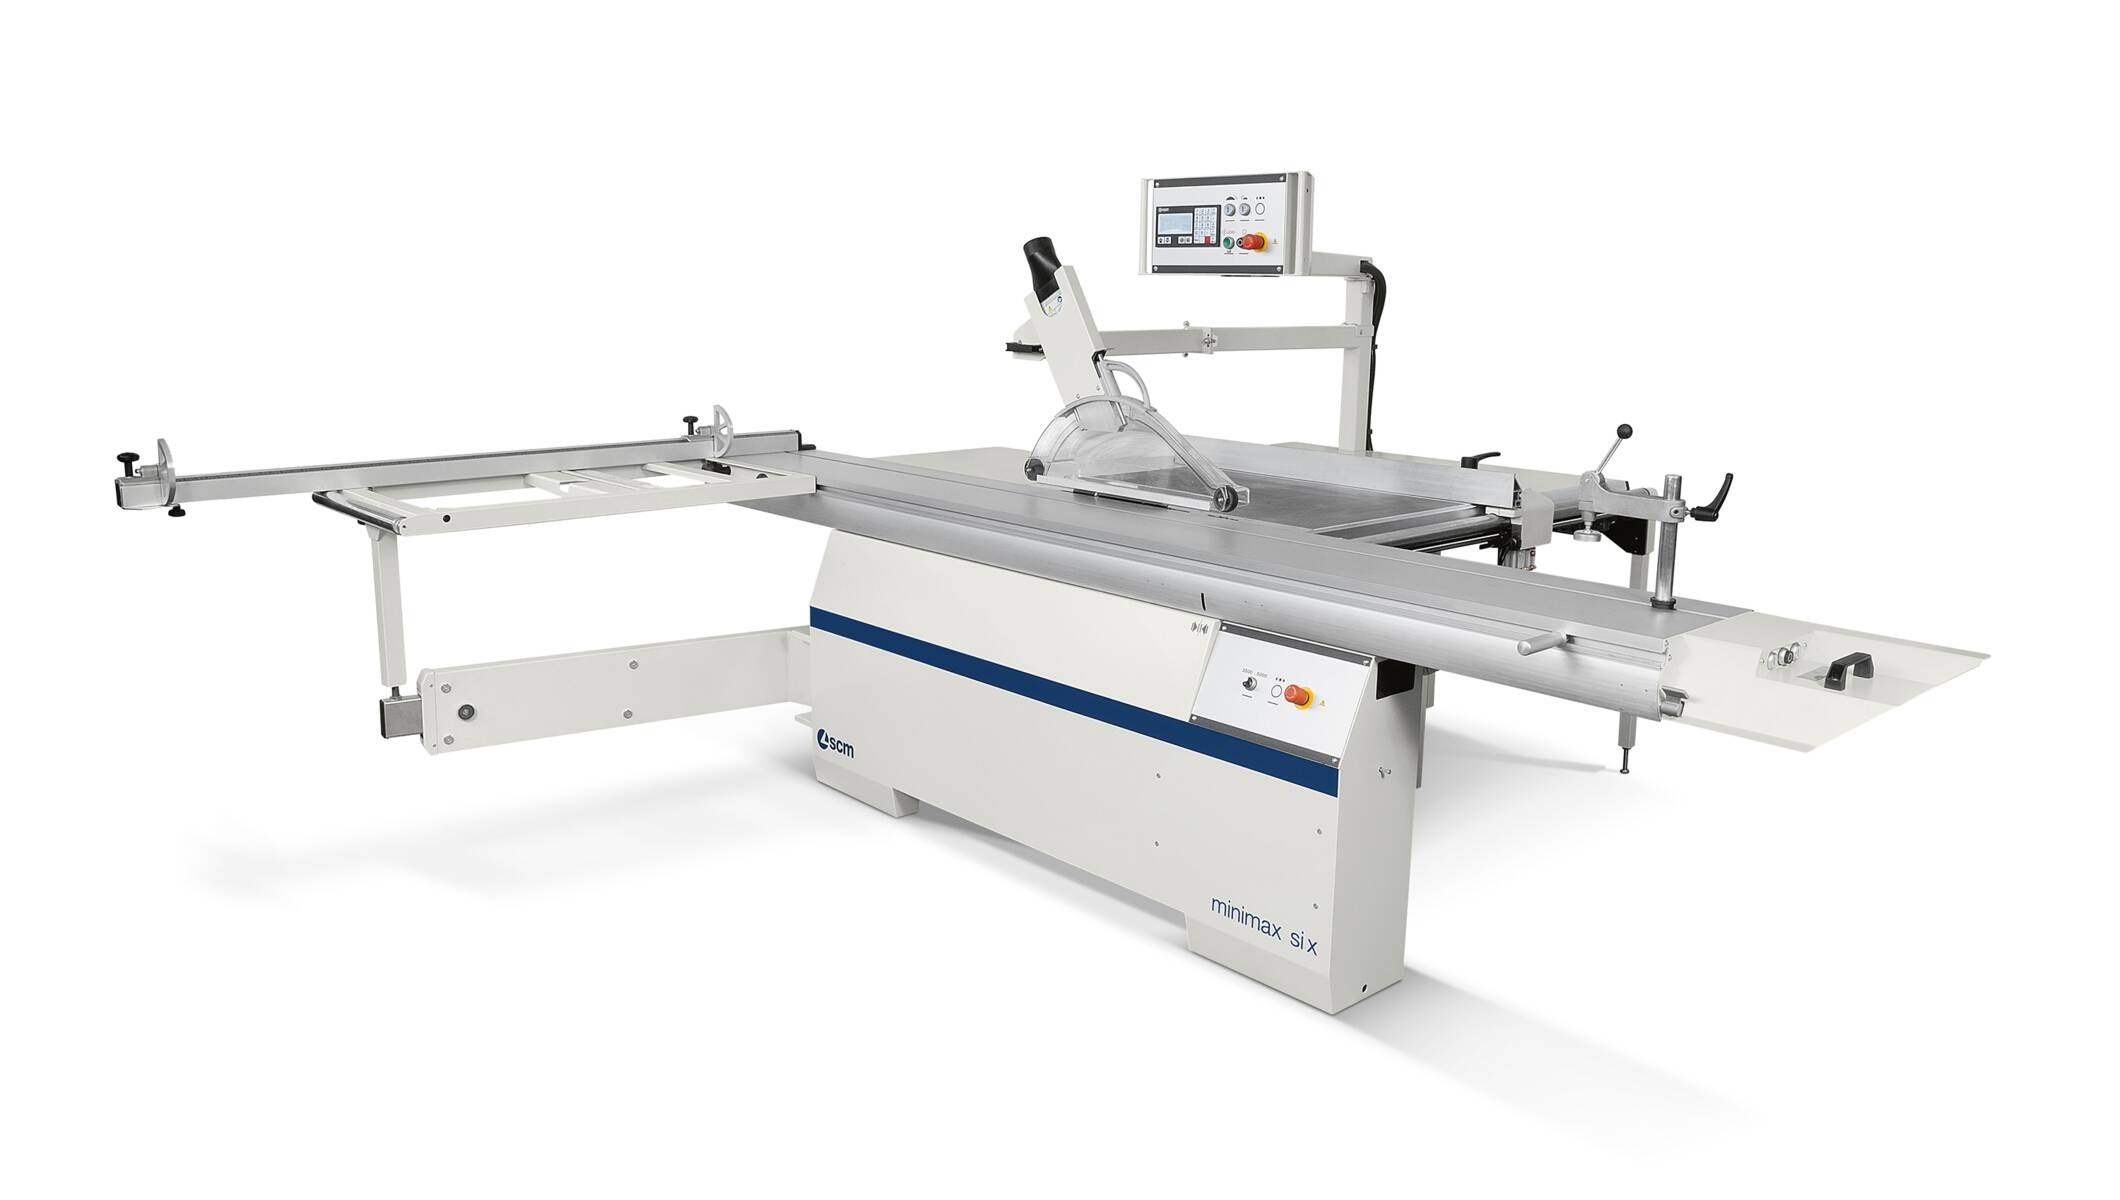 Joinery machines - Sliding table saws - minimax si x